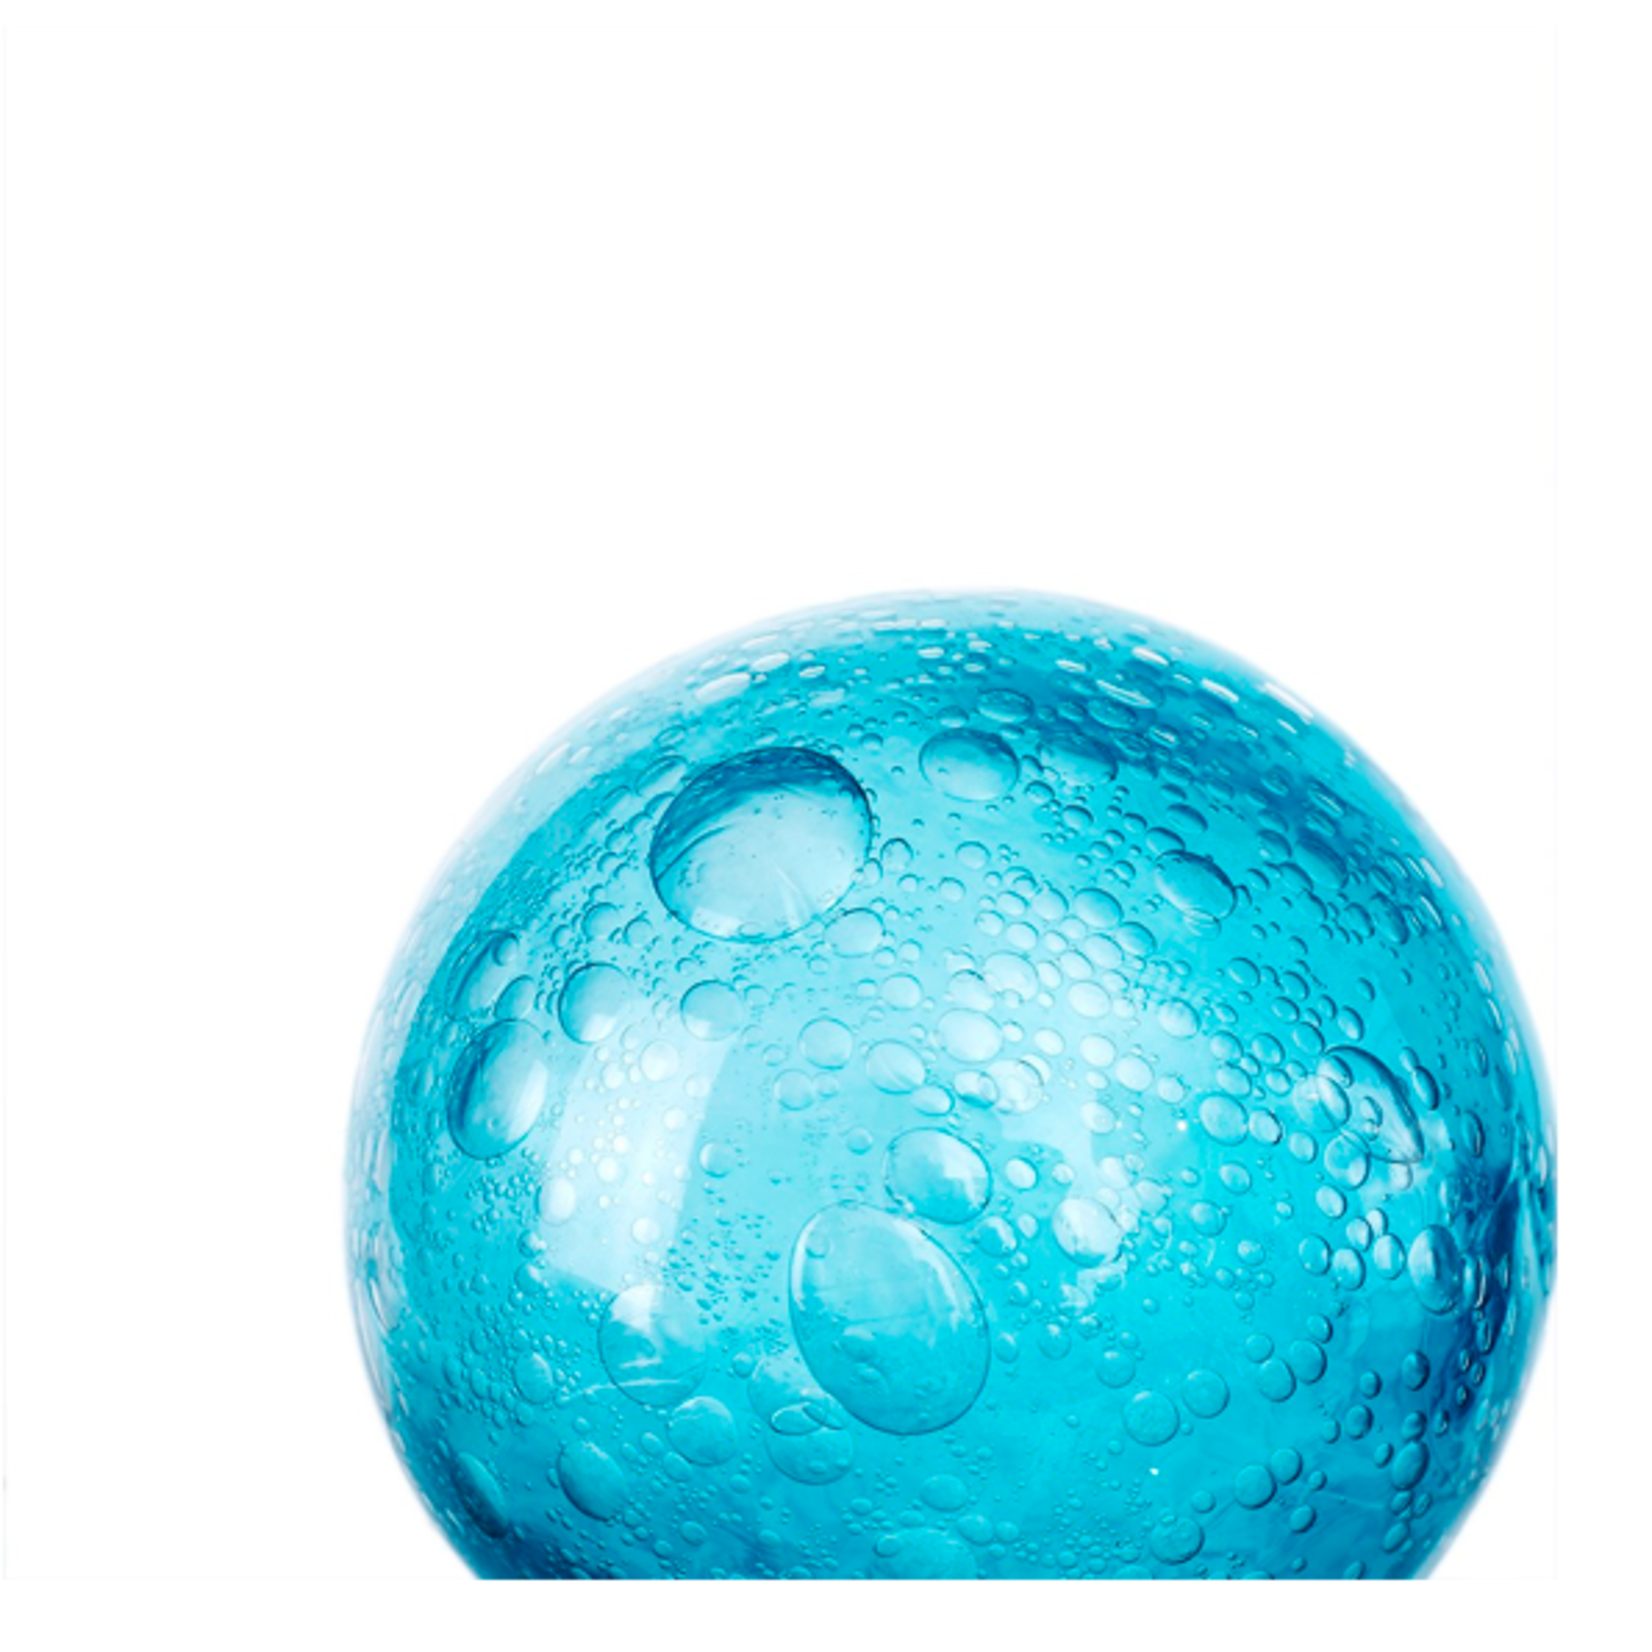 40% off was $8 now $4.79. 3”D BLUE DECORATIVE GLASS BALL SPHERE